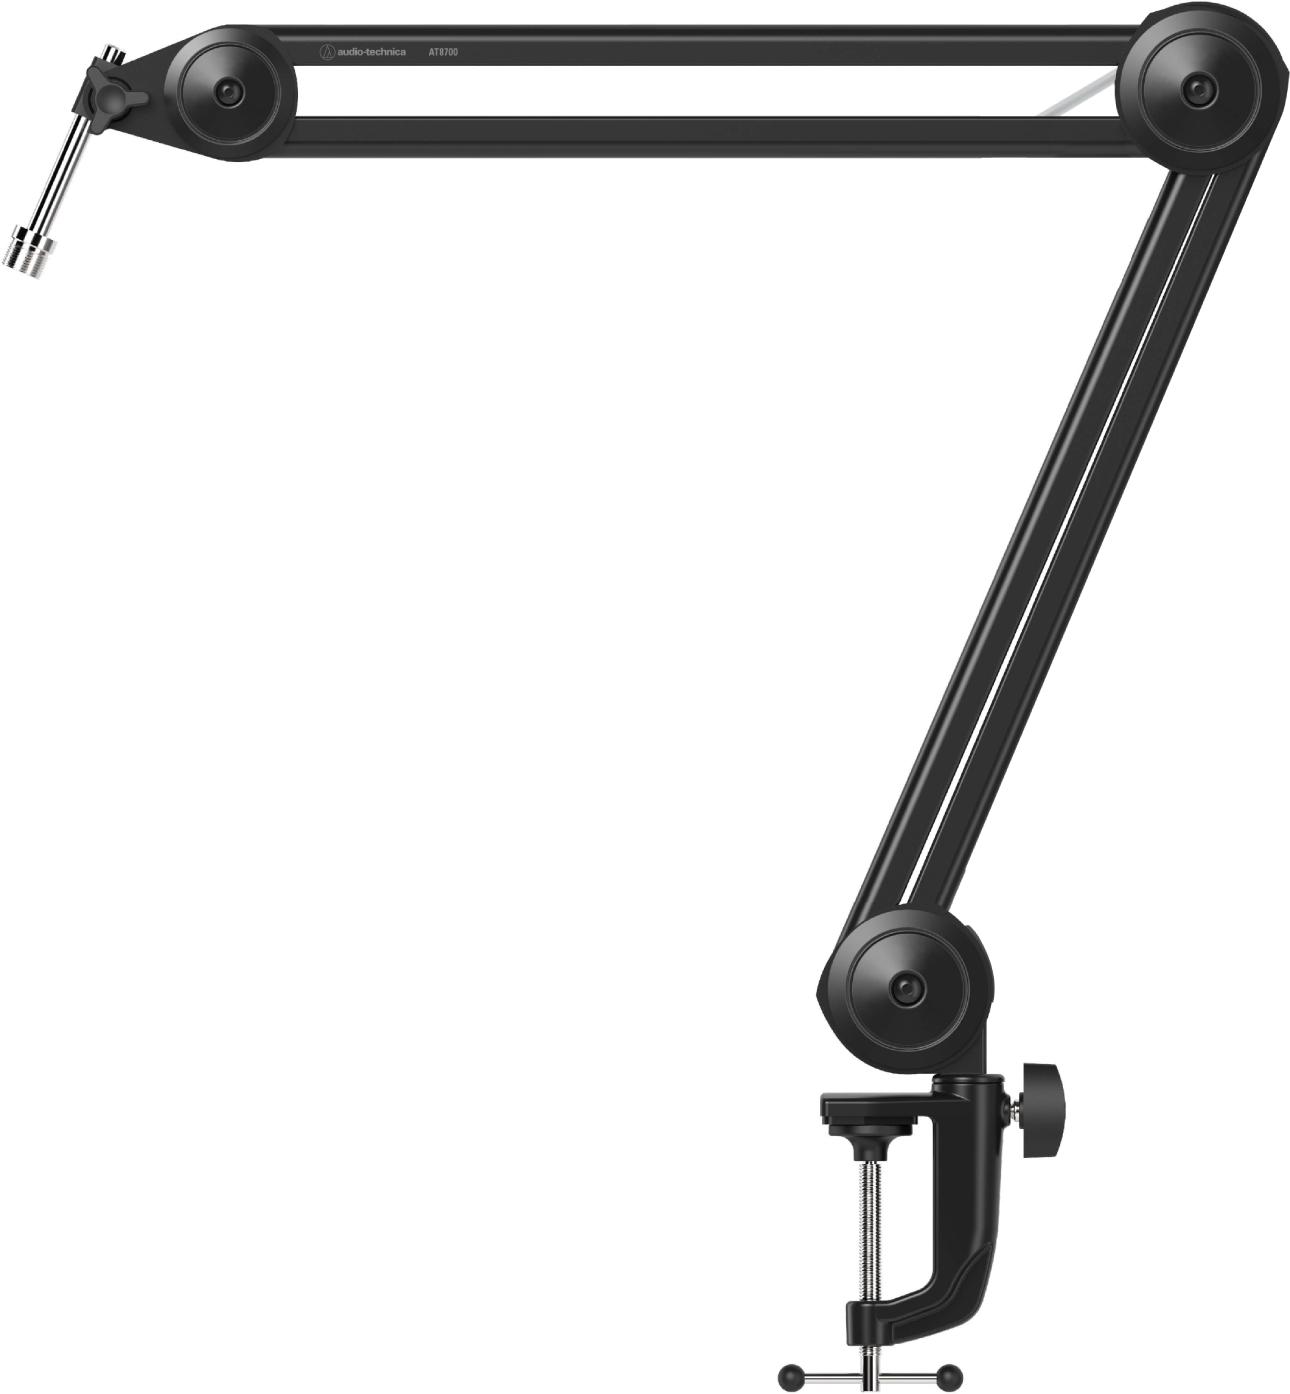 Audio Technica At 8700 - Microphone stand - Main picture